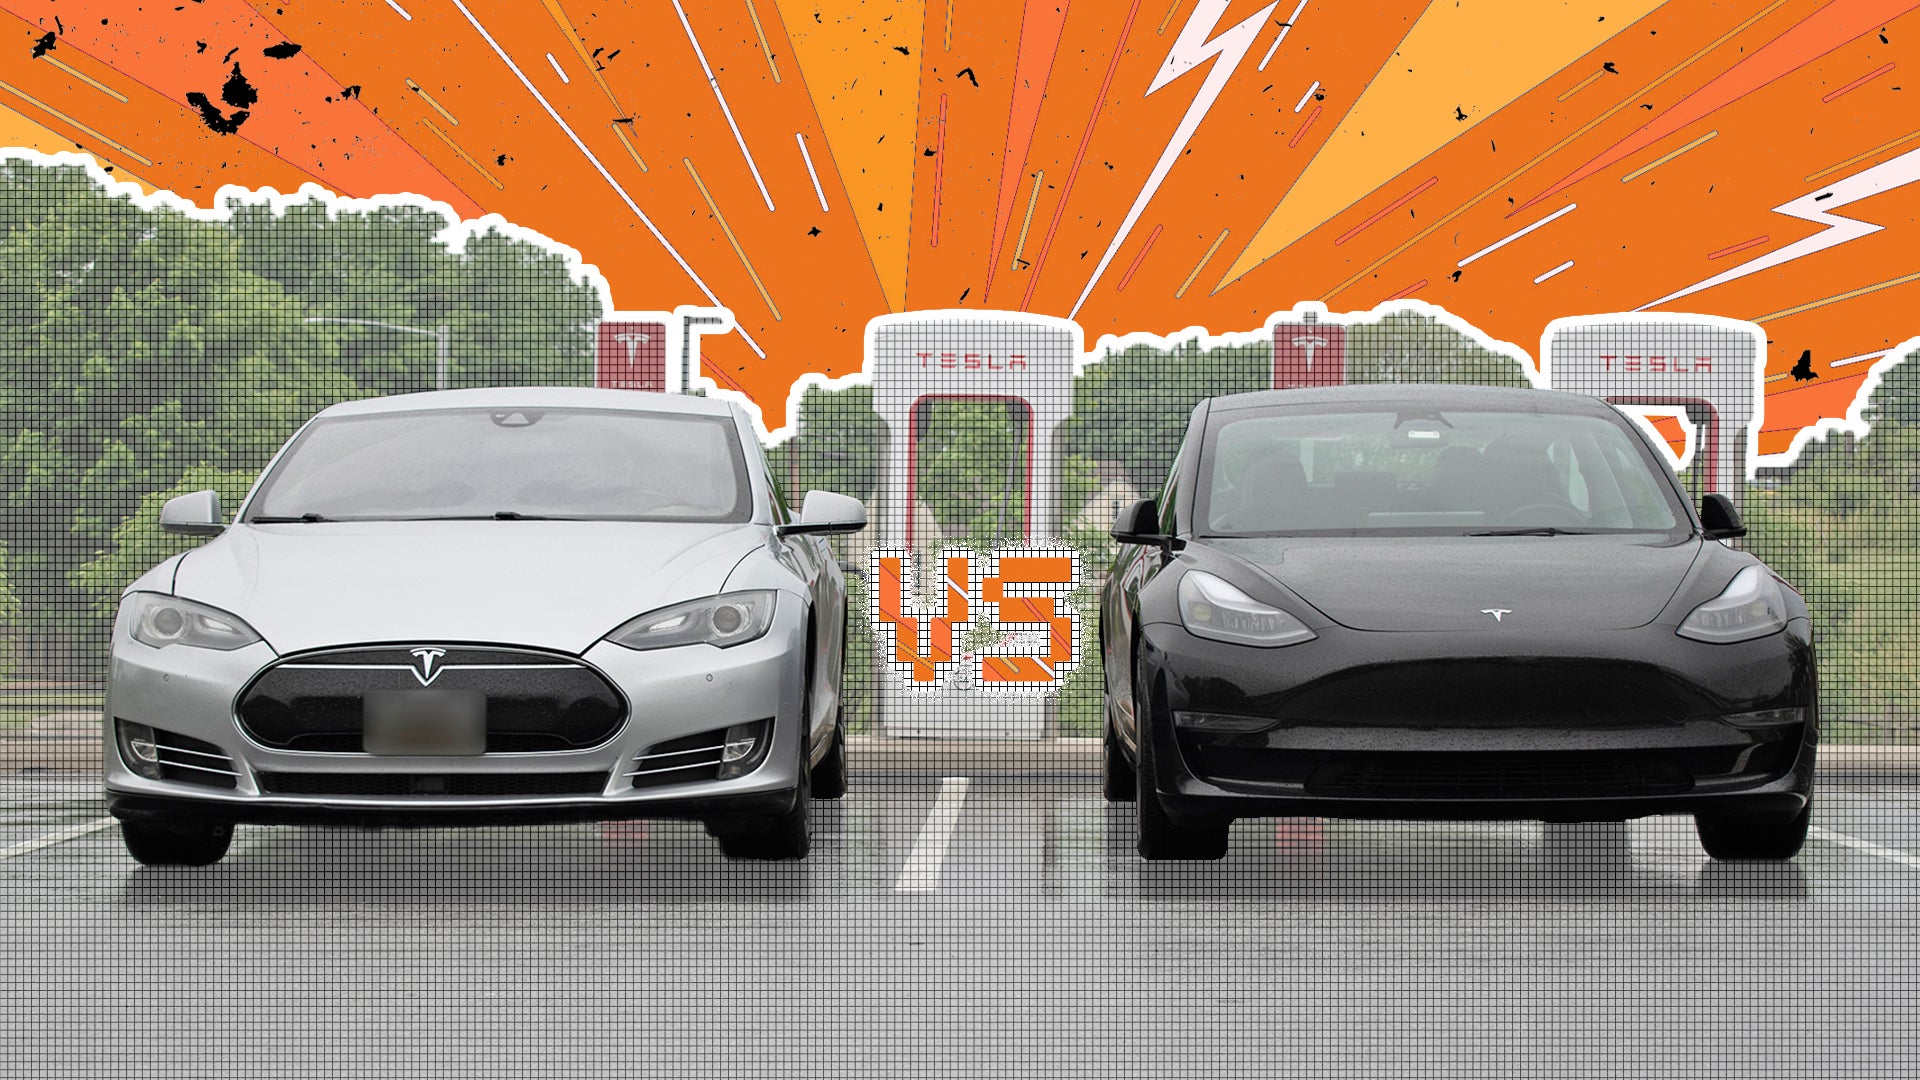 The new Tesla S: the model that changes the world - again